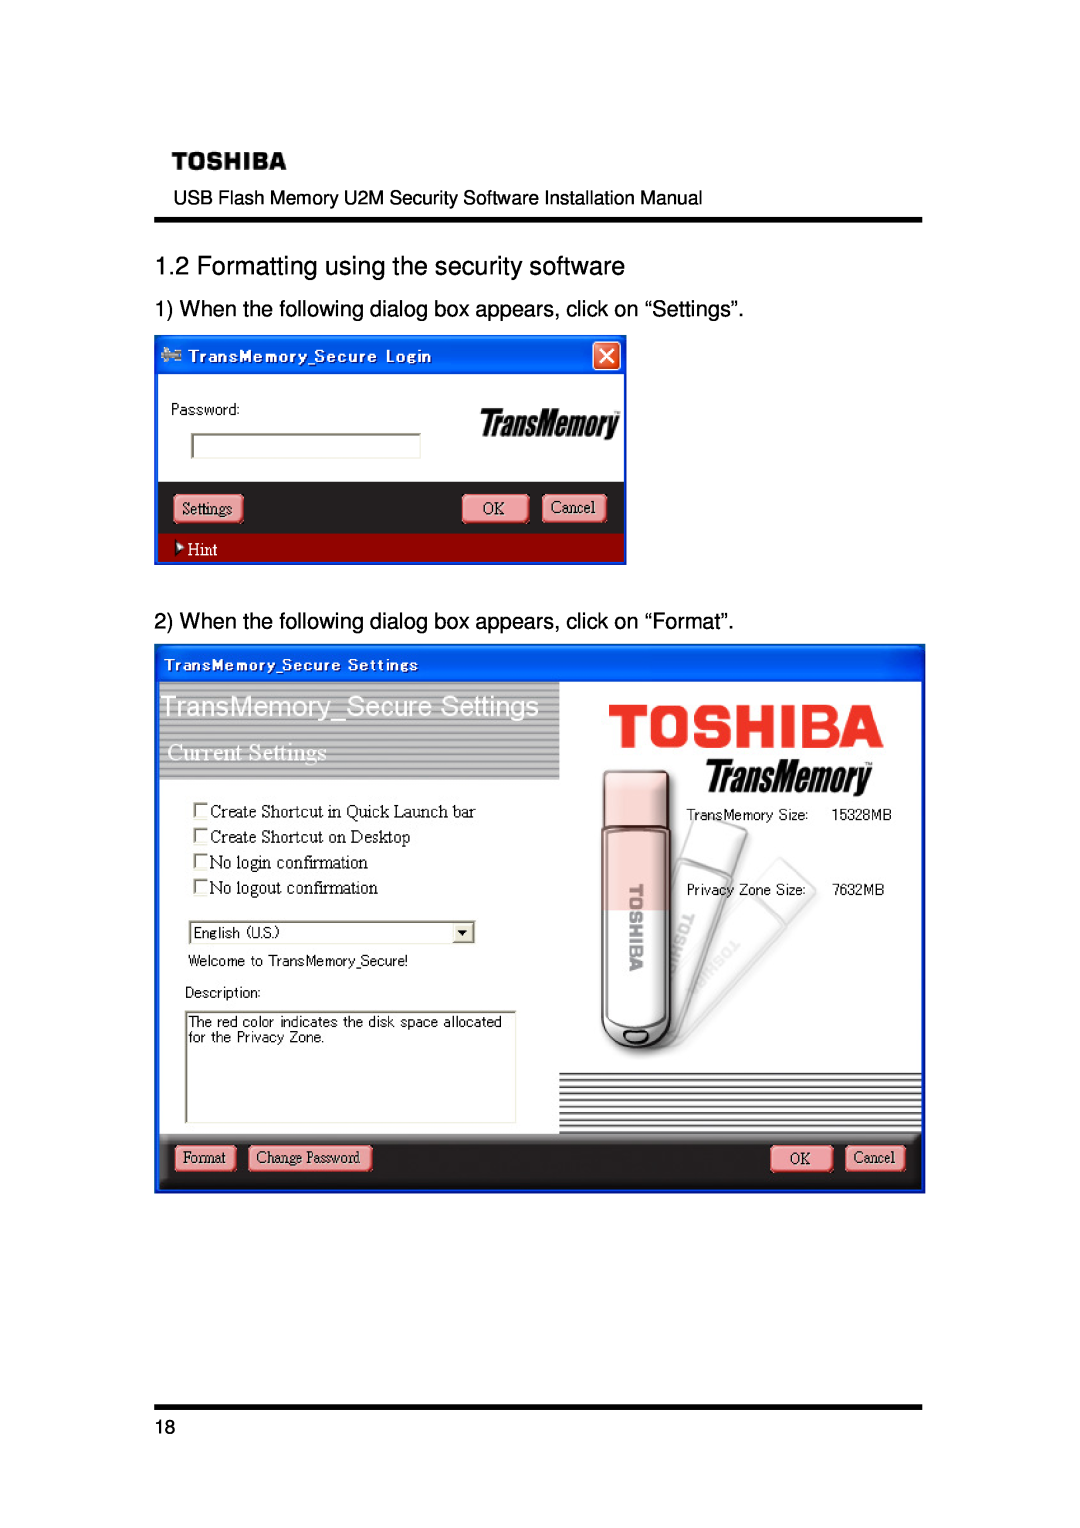 Toshiba U2M-016GT Formatting using the security software, When the following dialog box appears, click on “Settings” 